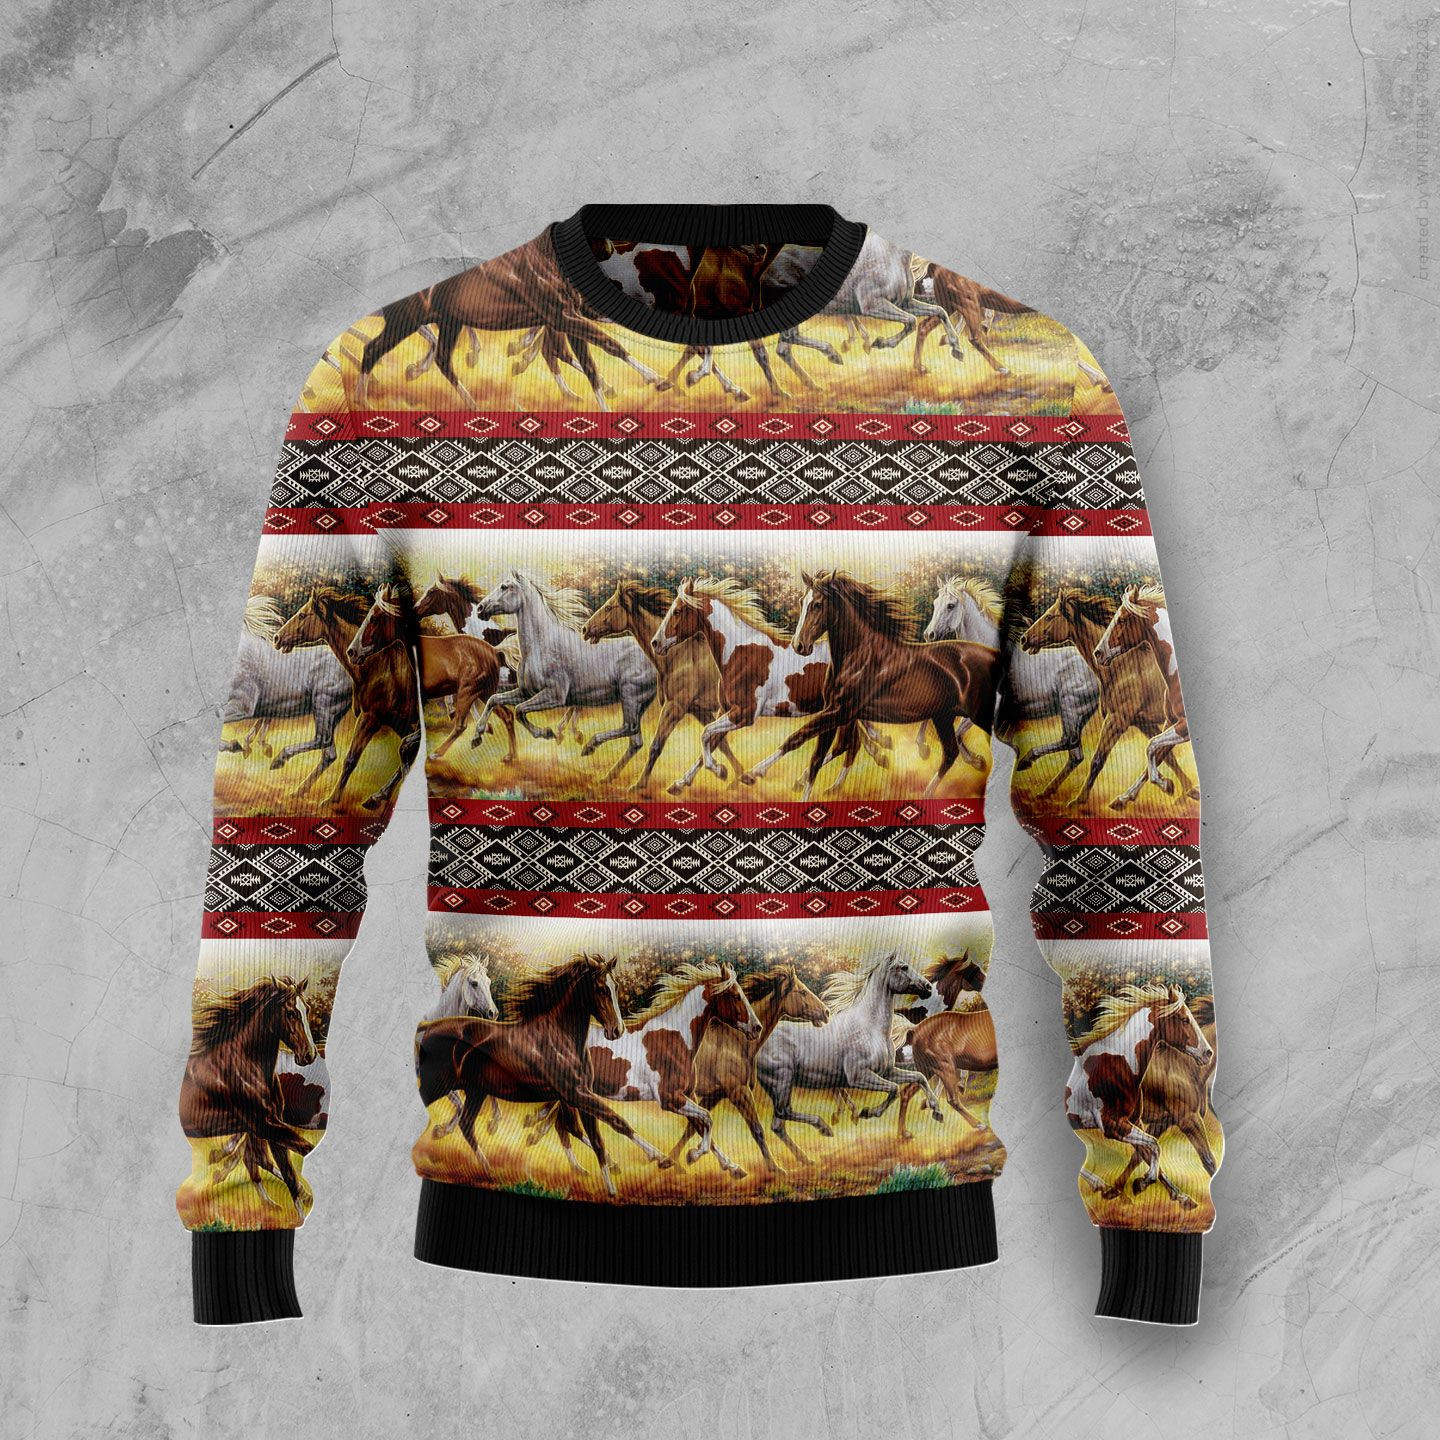 Horse Native American Pattern Ugly Christmas Sweater Ugly Sweater For Men Women